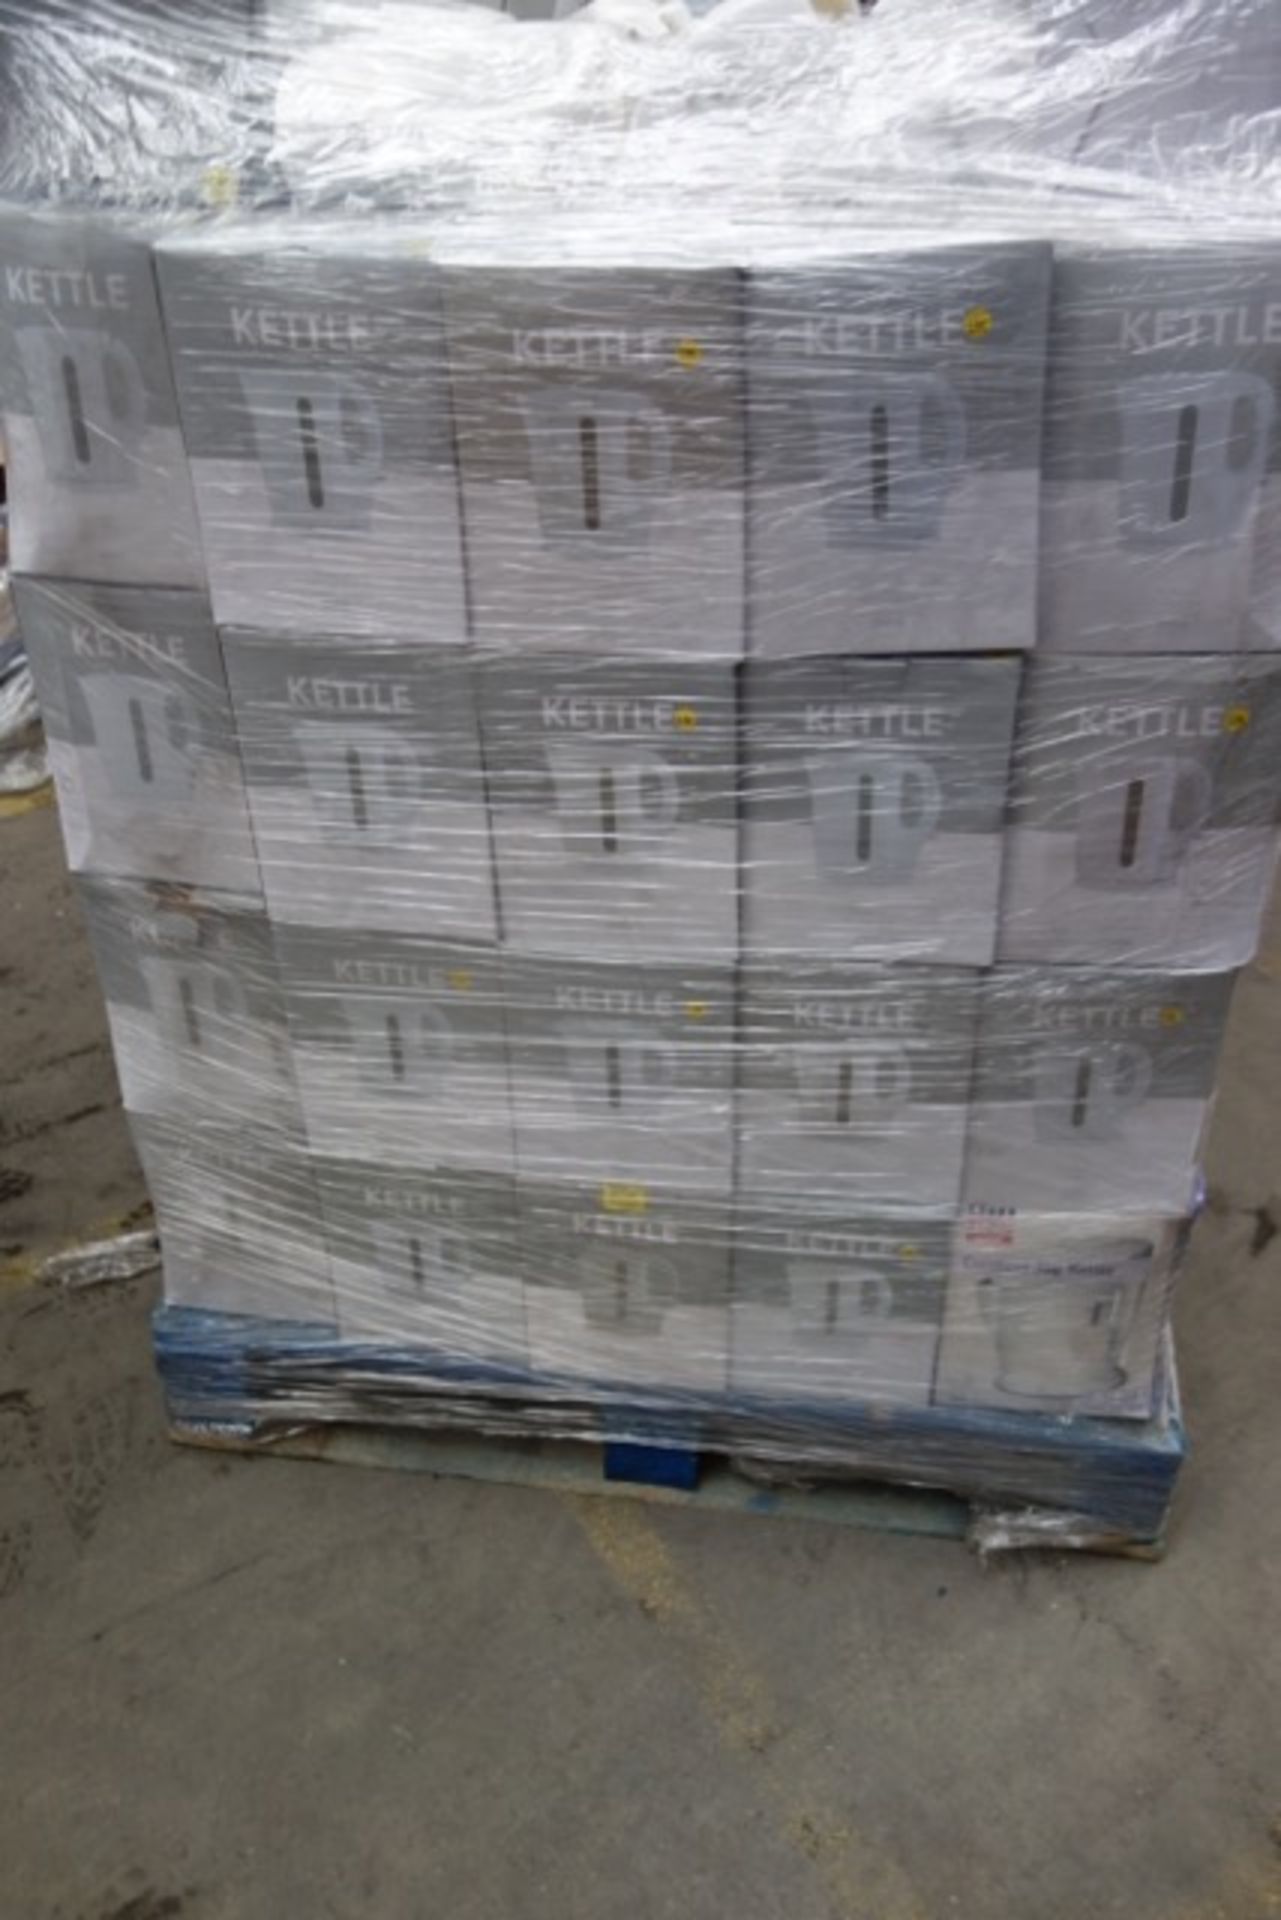 (NR11) PALLET TO CONTAIN APPROX. 140 x TESCO 1.7L CORDLESS KETTLES. UNCHECKED/UNTESTED CUSTOMER